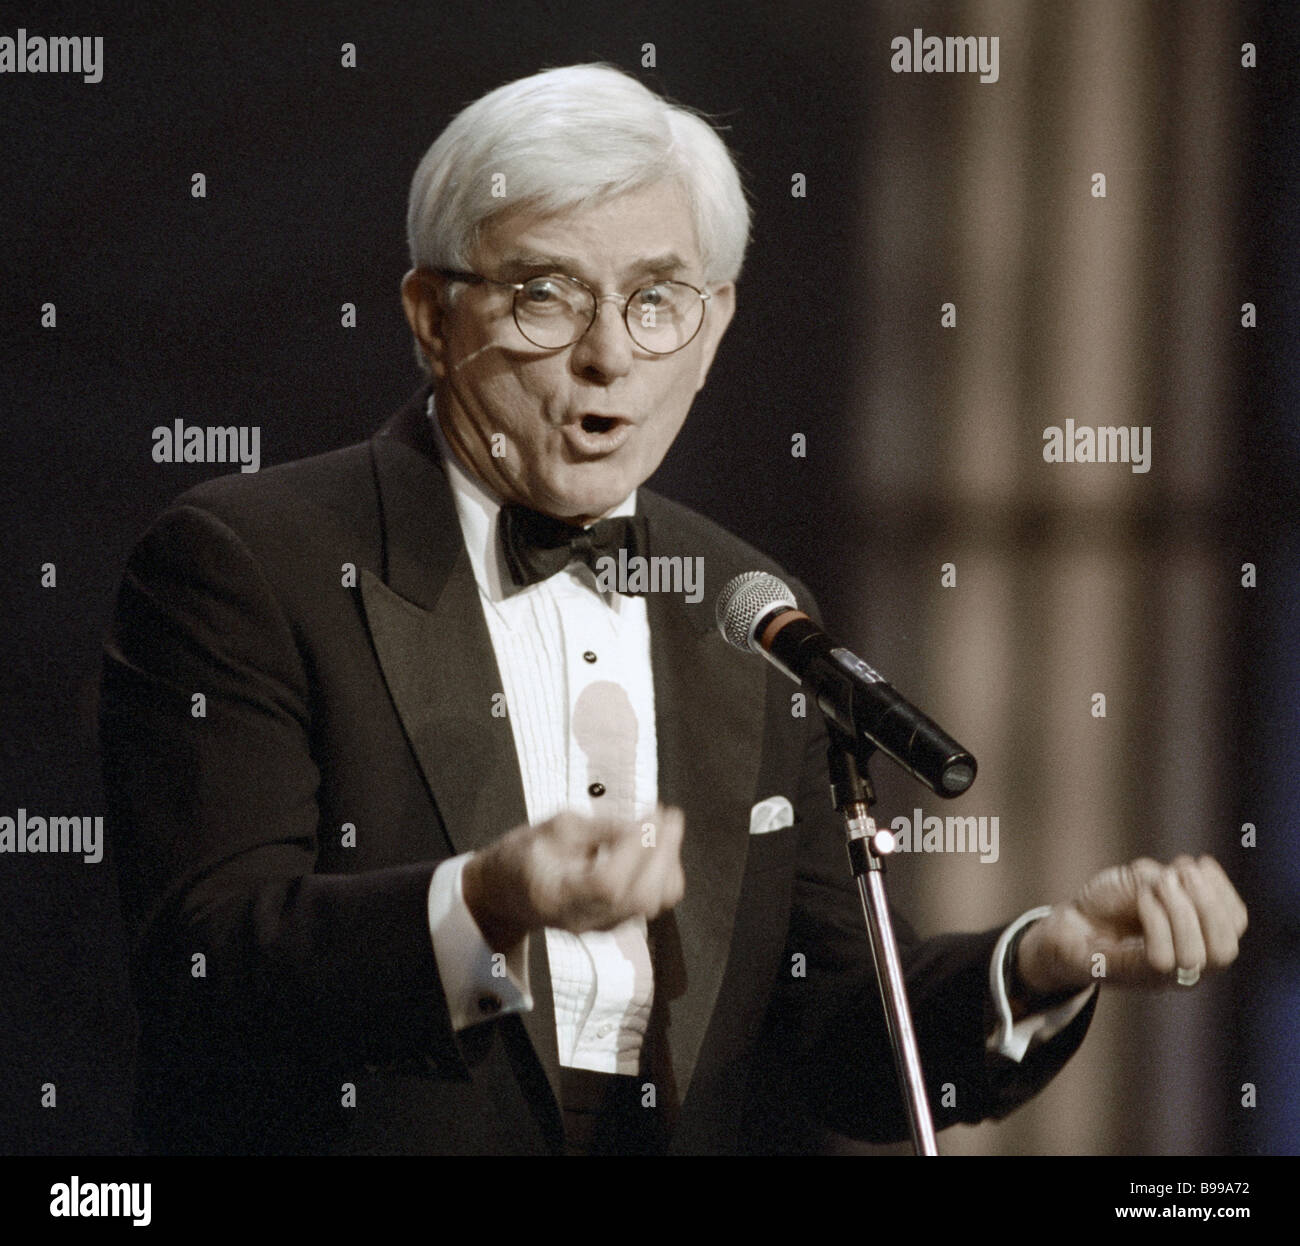 US TV presenter Phil Donahue guest of the TEFI 95 awarding ceremony ...